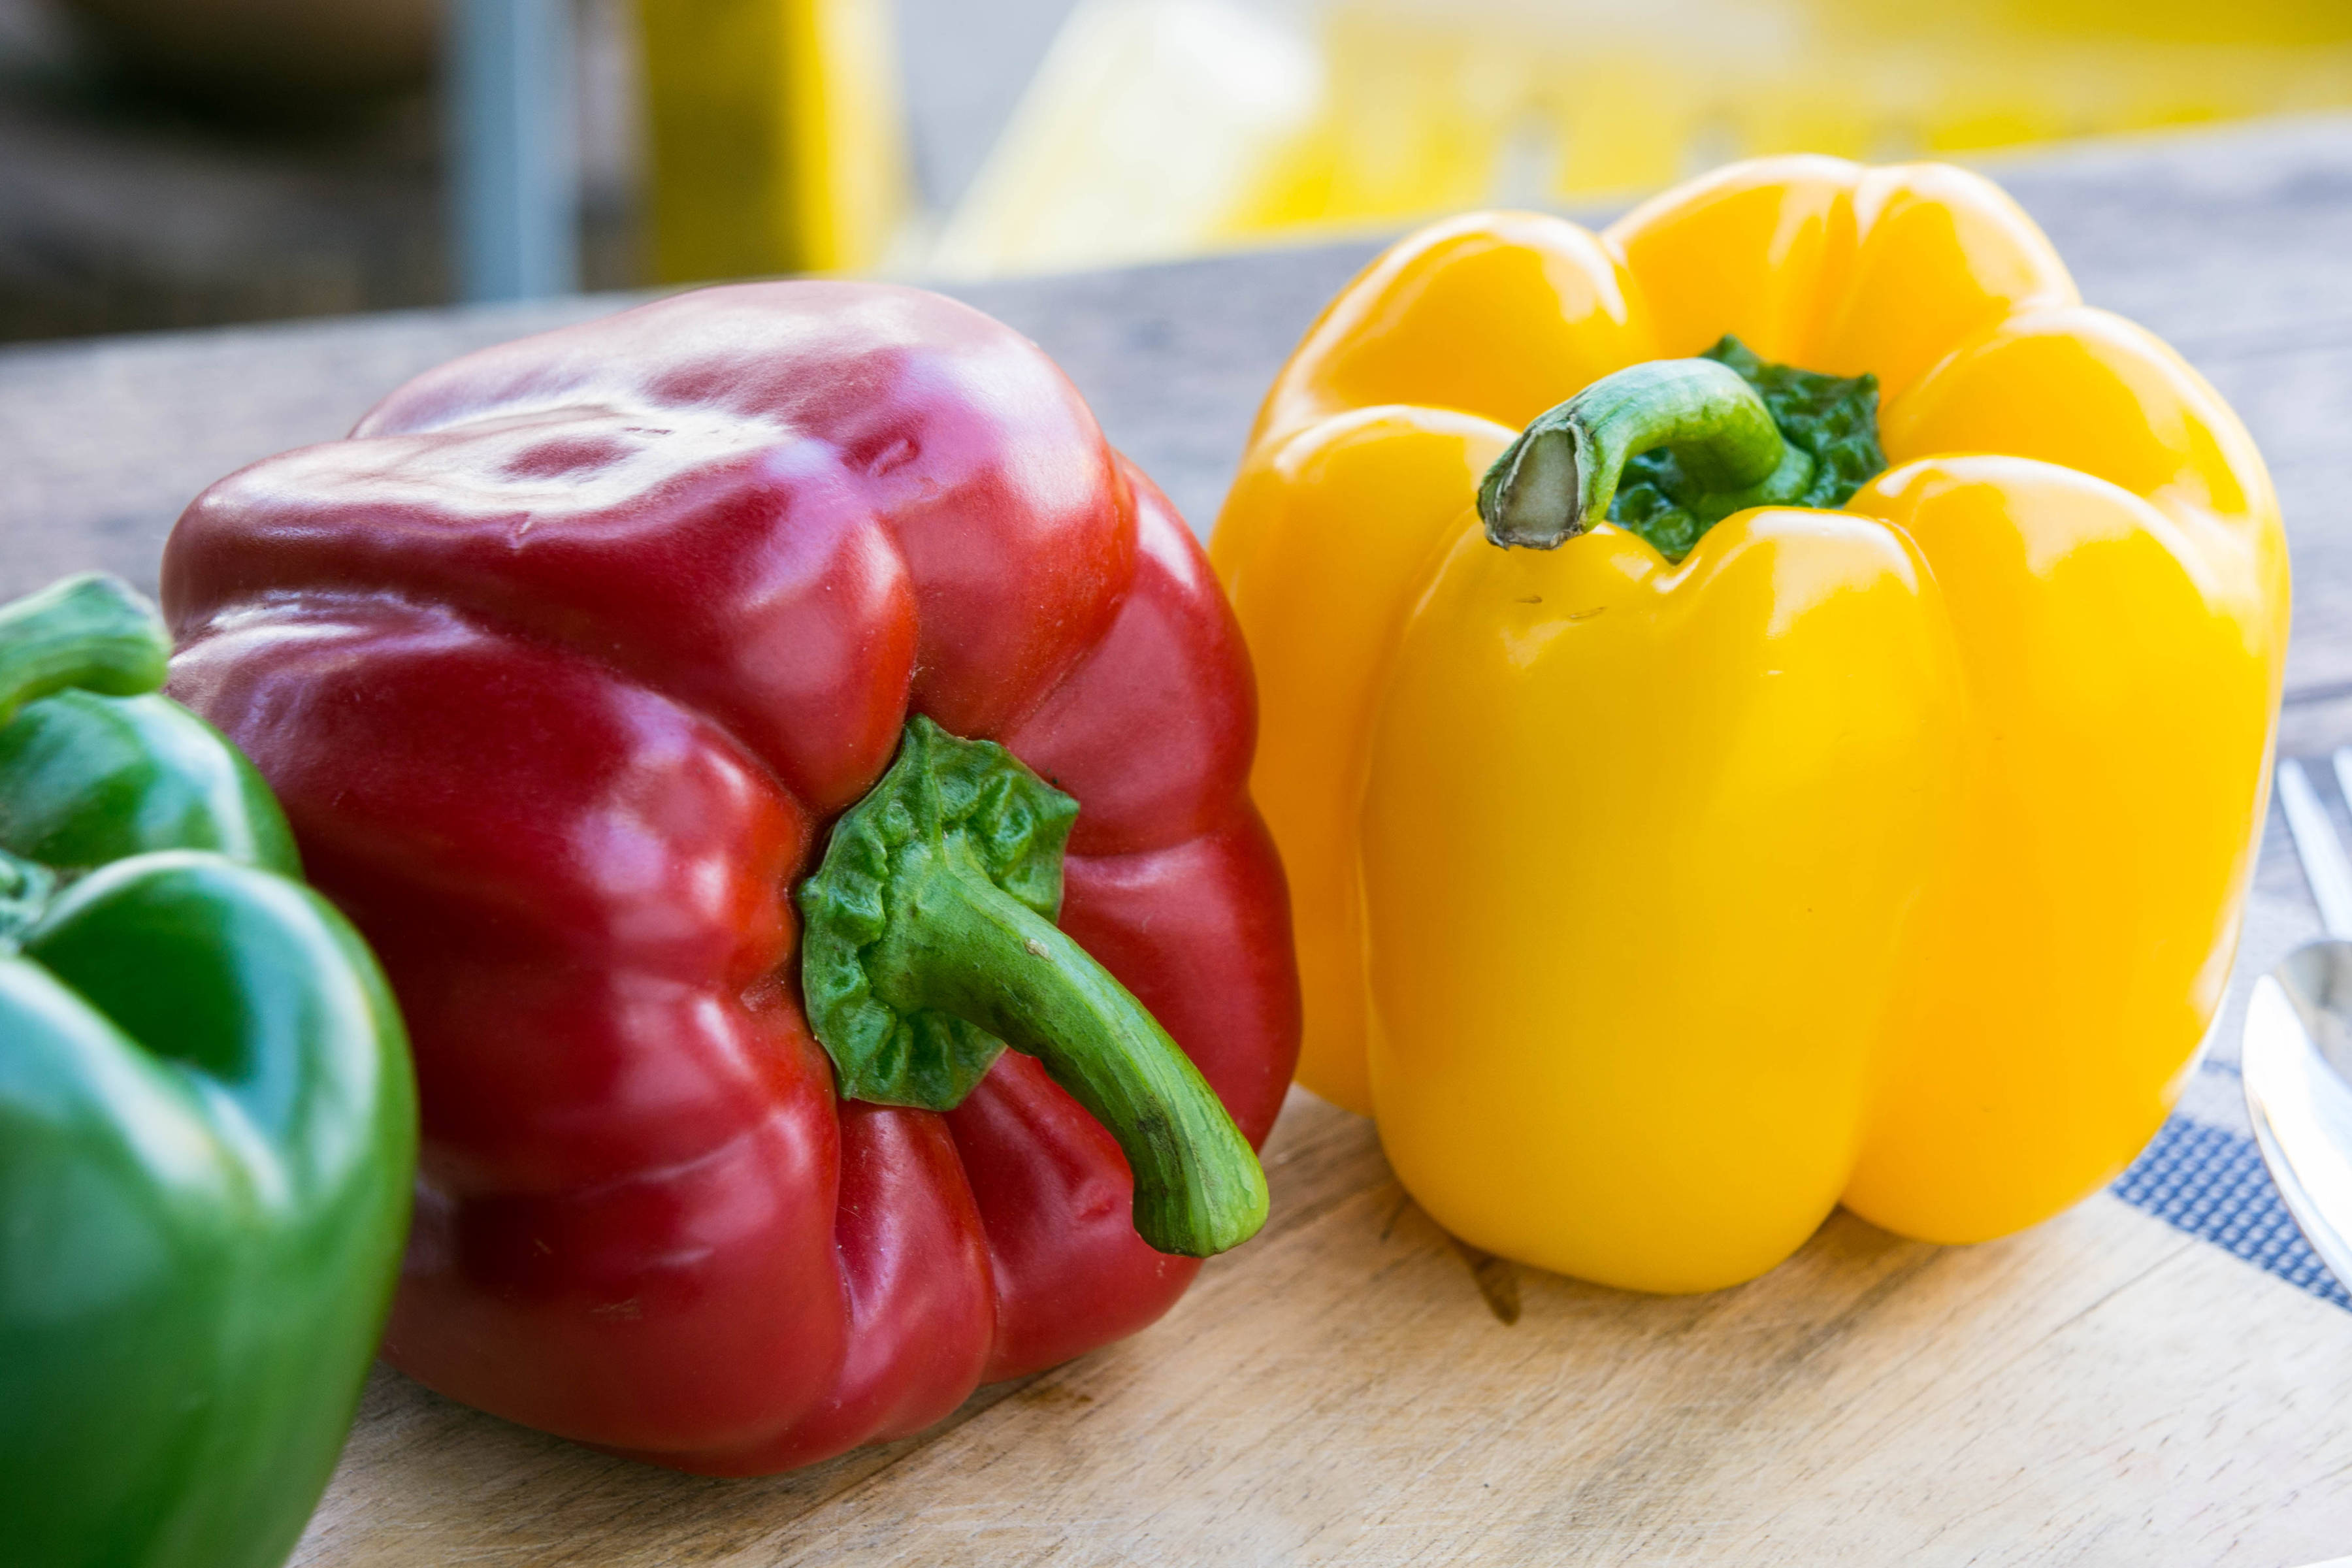 Green, red, and yellow capsicums. Photo: AboutnuyLove / iStock.